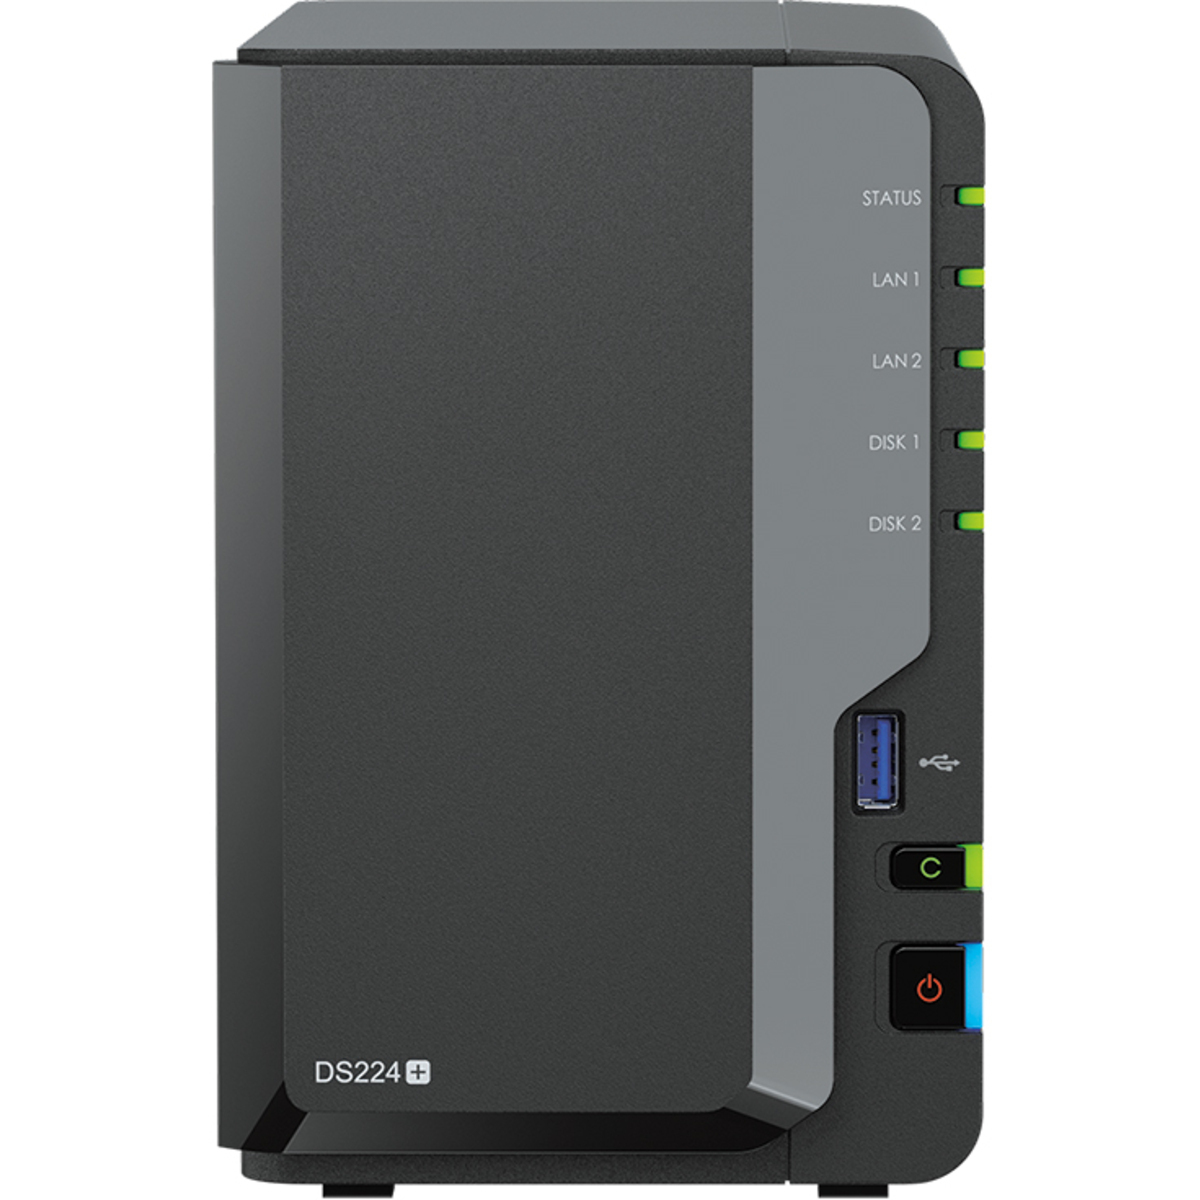 Synology DiskStation DS224+ 28tb 2-Bay Desktop Personal / Basic Home / Small Office NAS - Network Attached Storage Device 2x14tb Seagate EXOS X18 ST14000NM000J 3.5 7200rpm SATA 6Gb/s HDD ENTERPRISE Class Drives Installed - Burn-In Tested - ON SALE - FREE RAM UPGRADE DiskStation DS224+